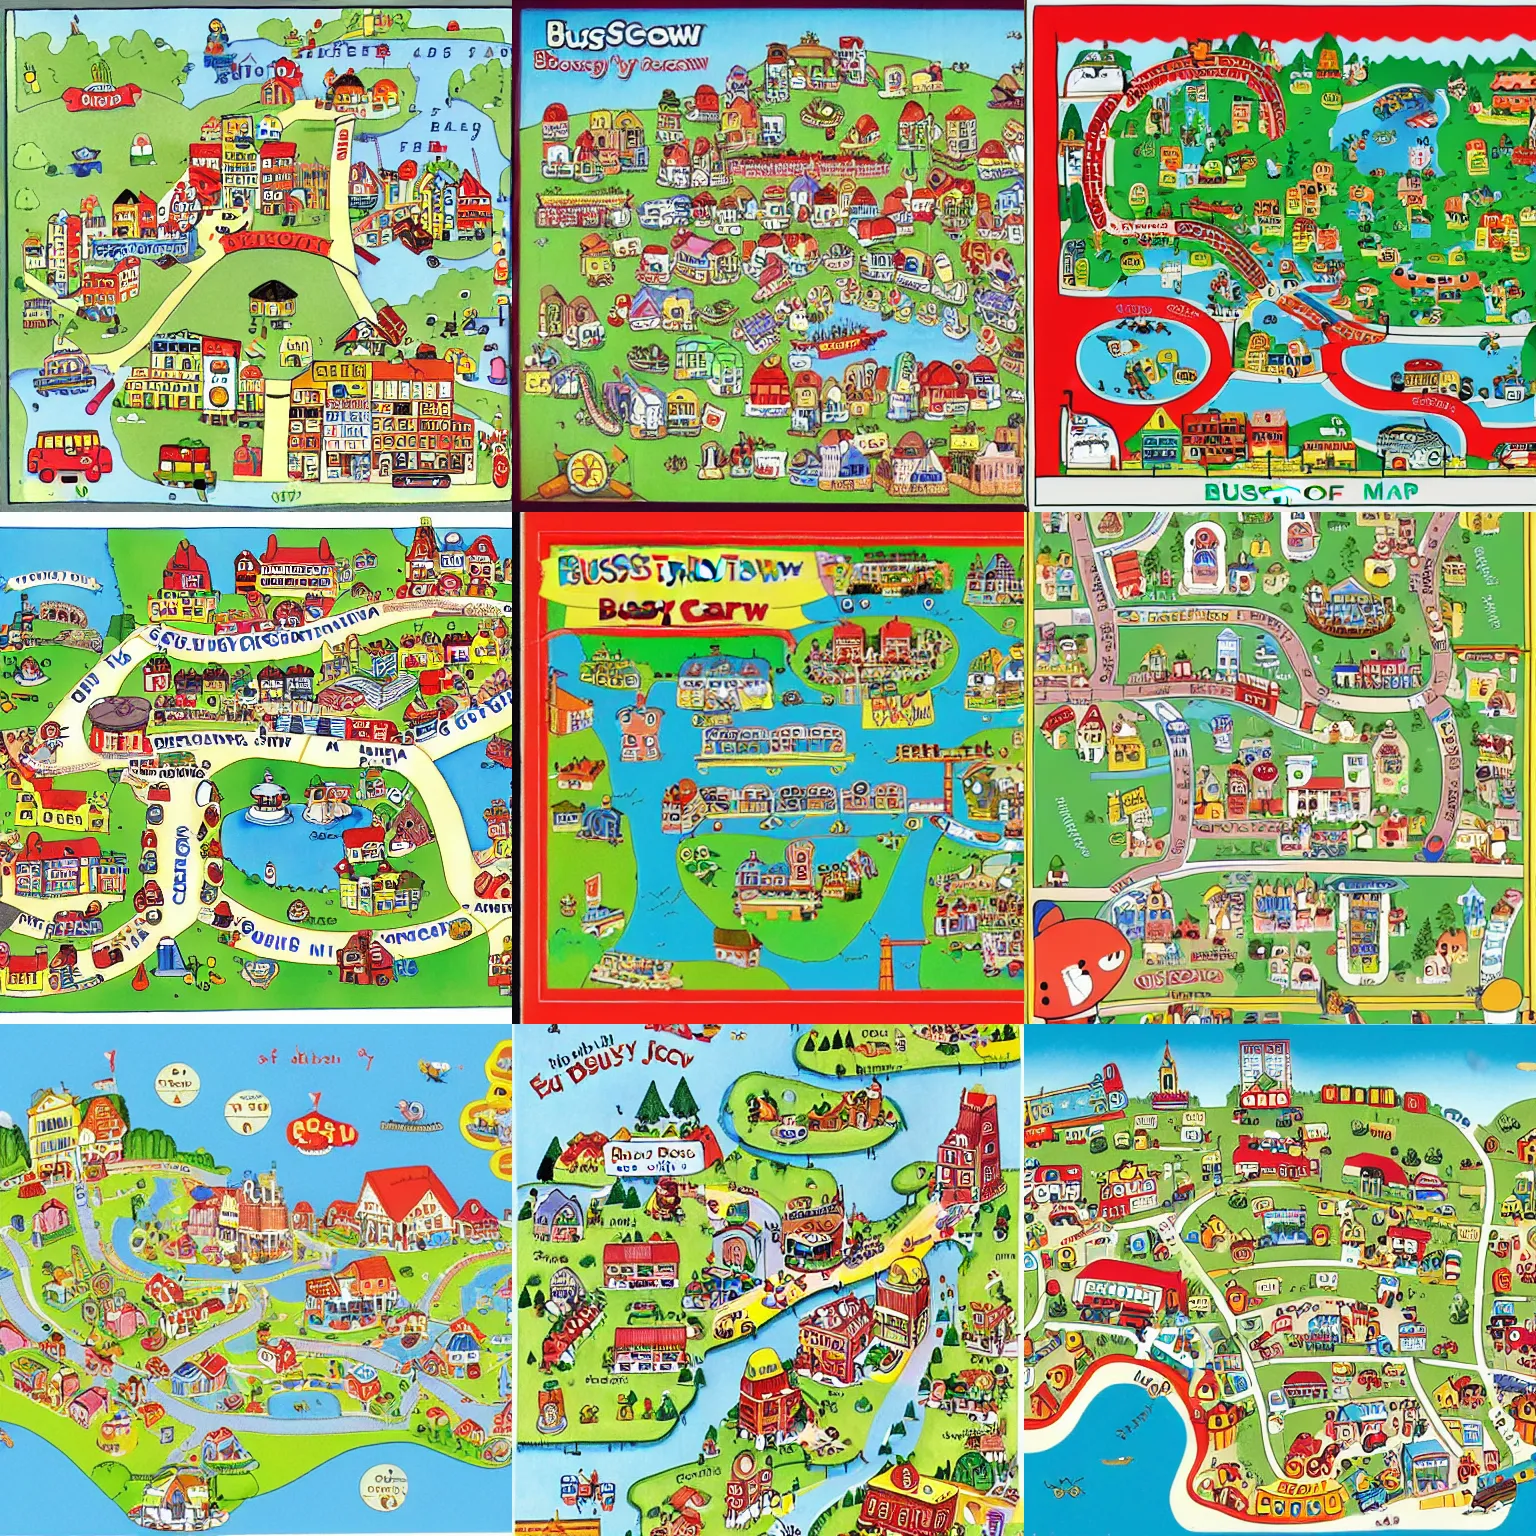 Prompt: map of busytown by richard scarry